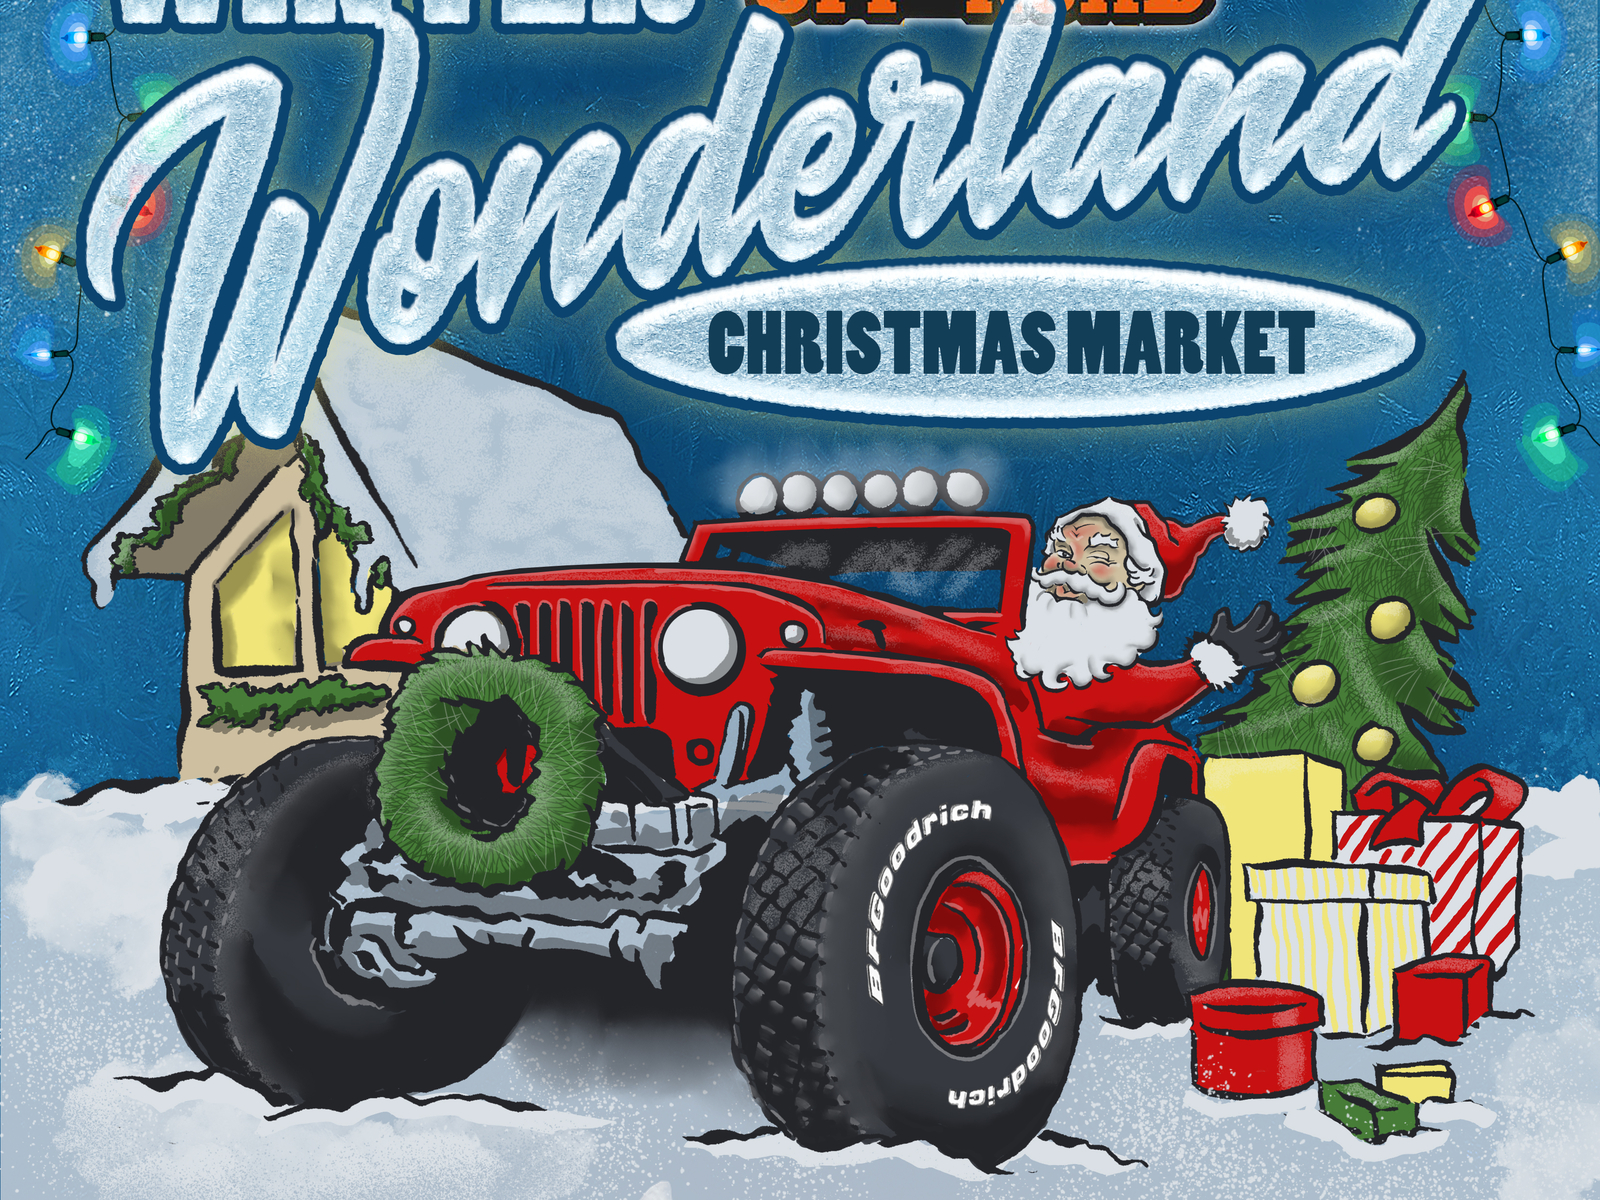 Jeep Christmas 2018 by Michael Clanton on Dribbble